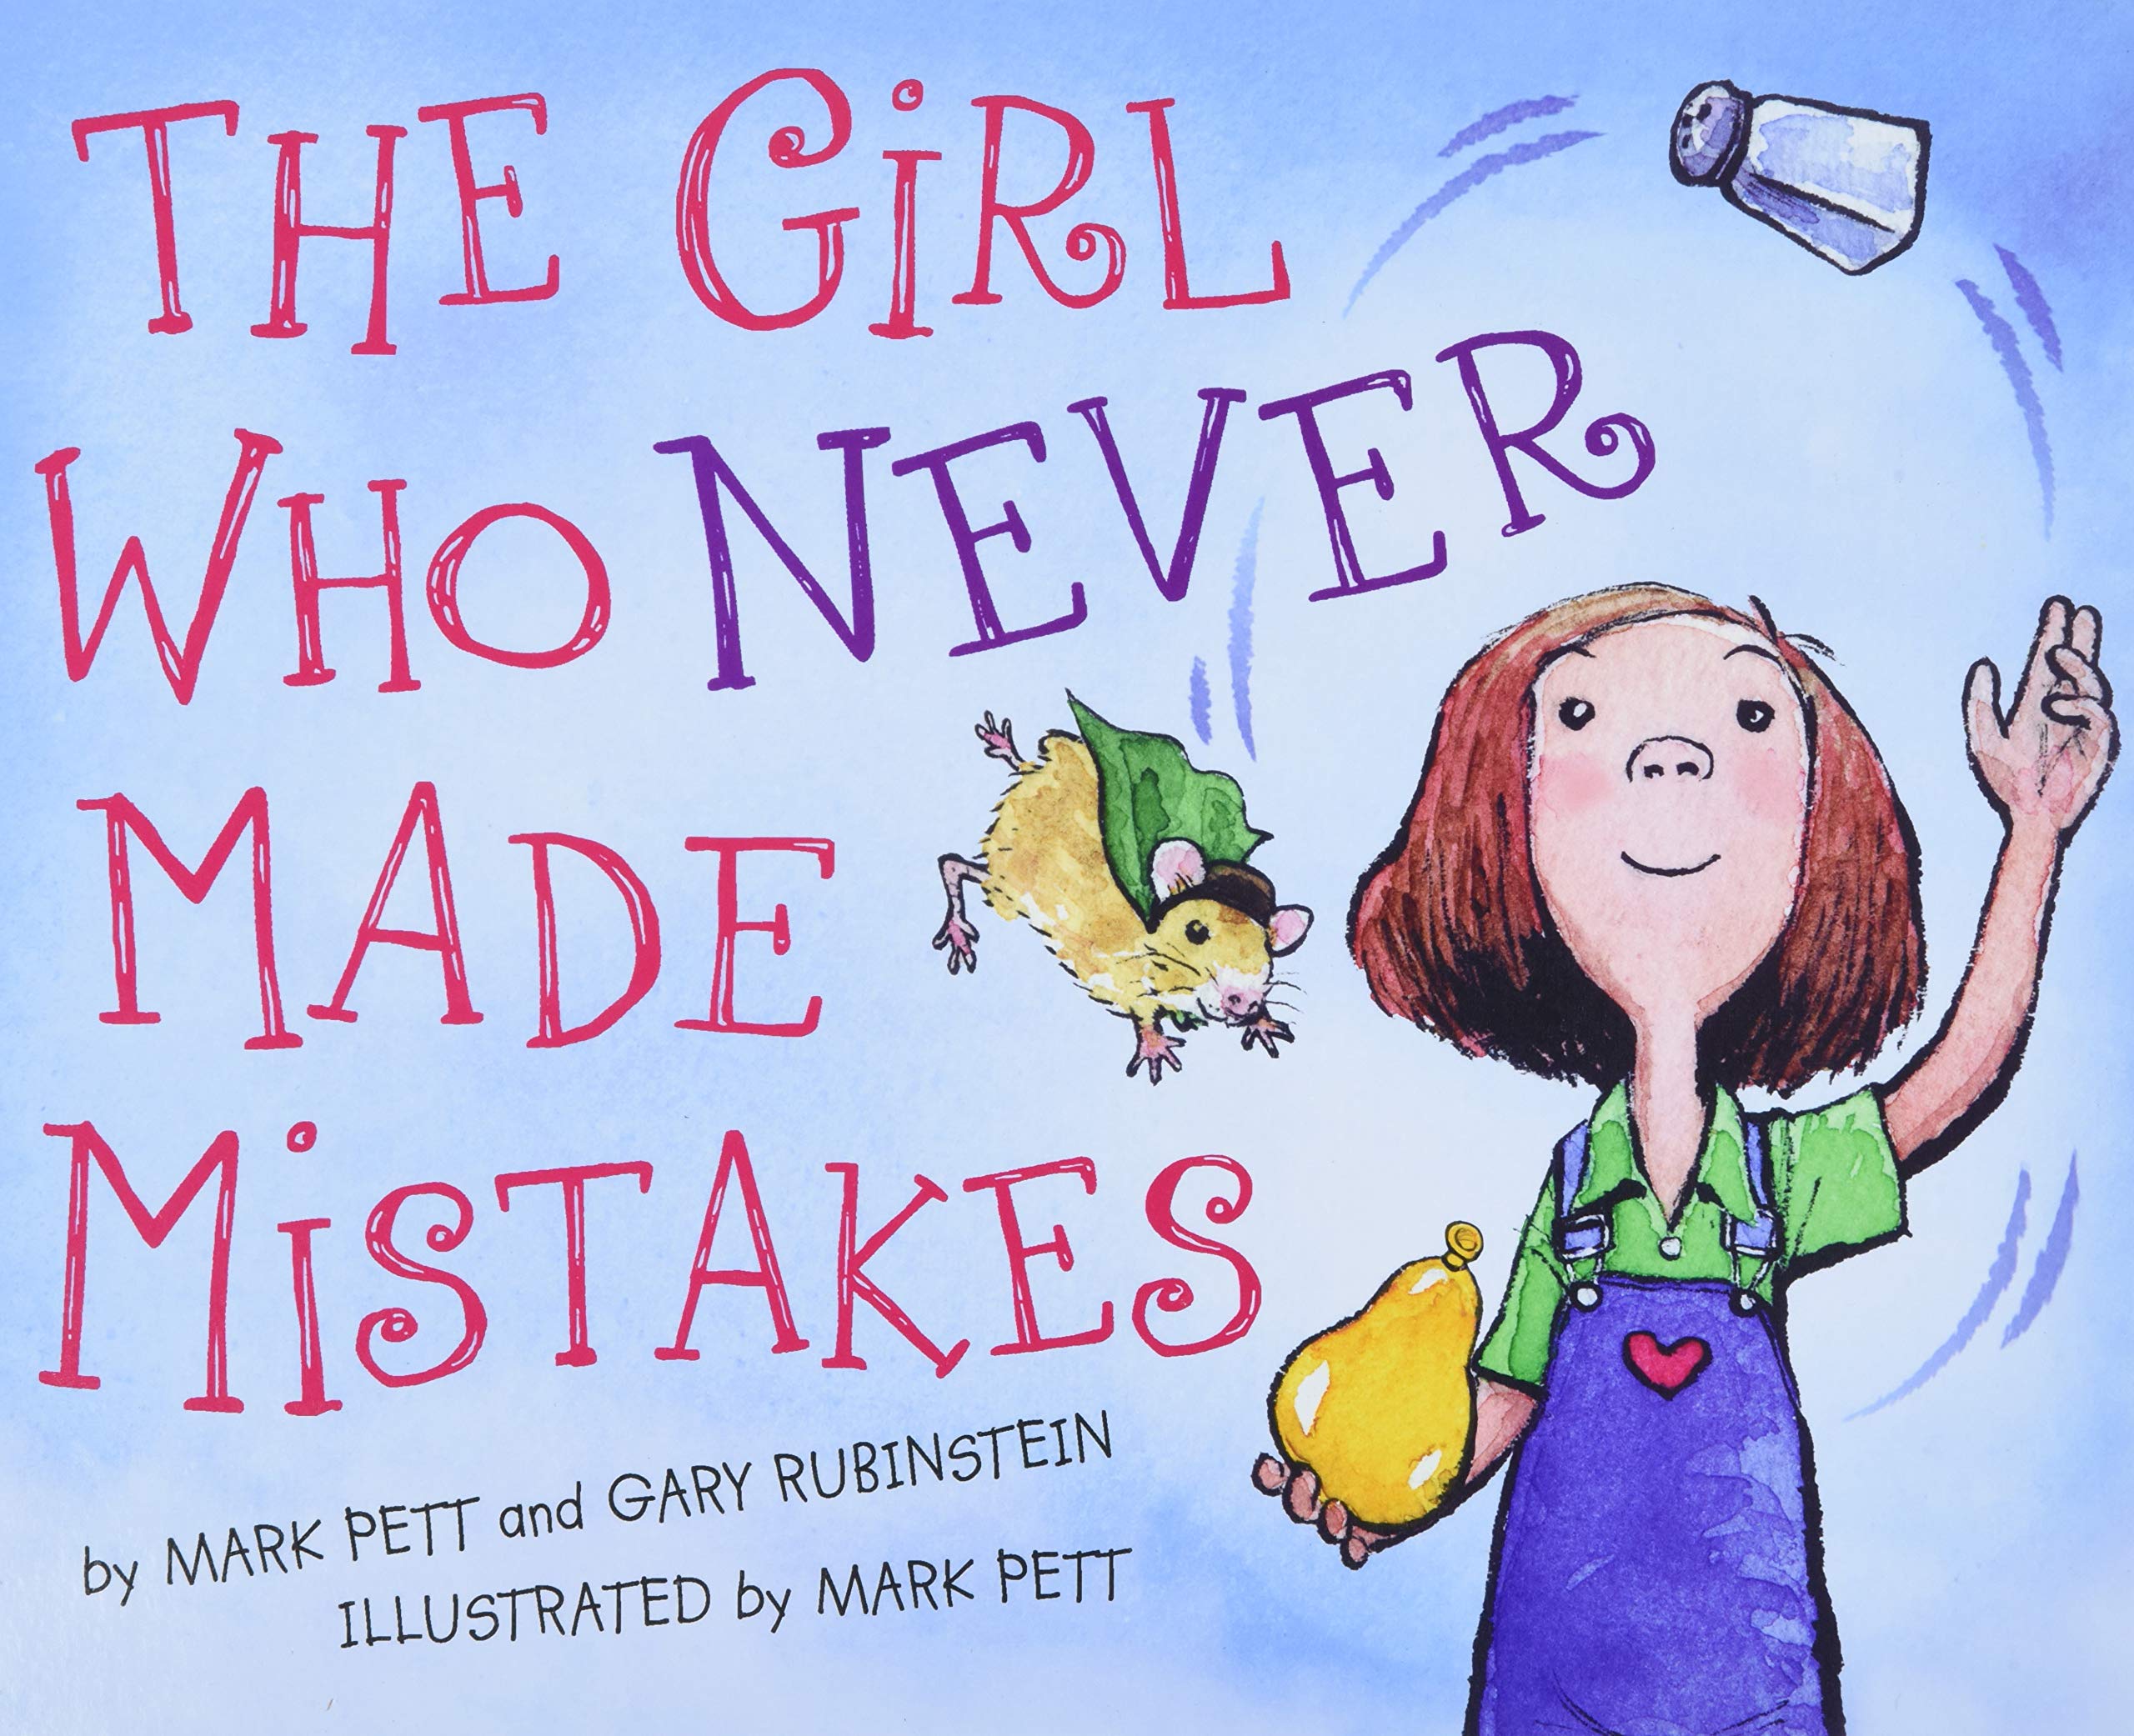 speech and language teaching concepts for The Girl Who Never Made Mistakes in speech therapy​ ​